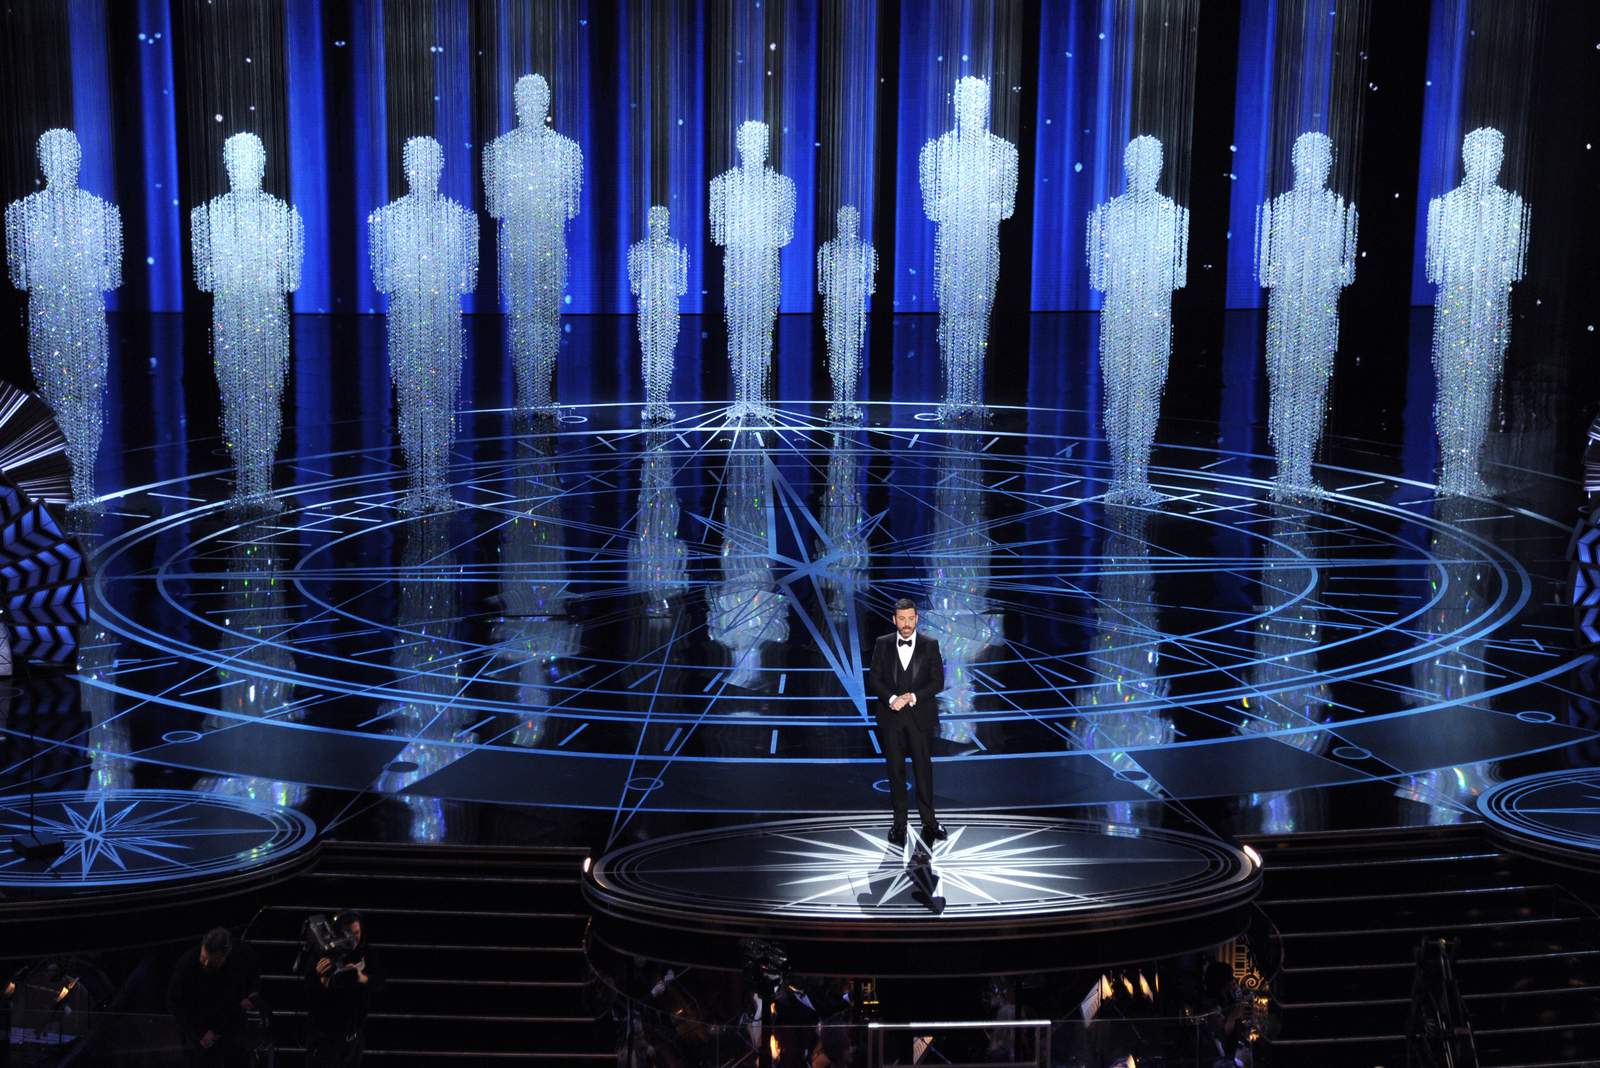 Will the Oscars be a ‘who cares’ moment as ratings dive?